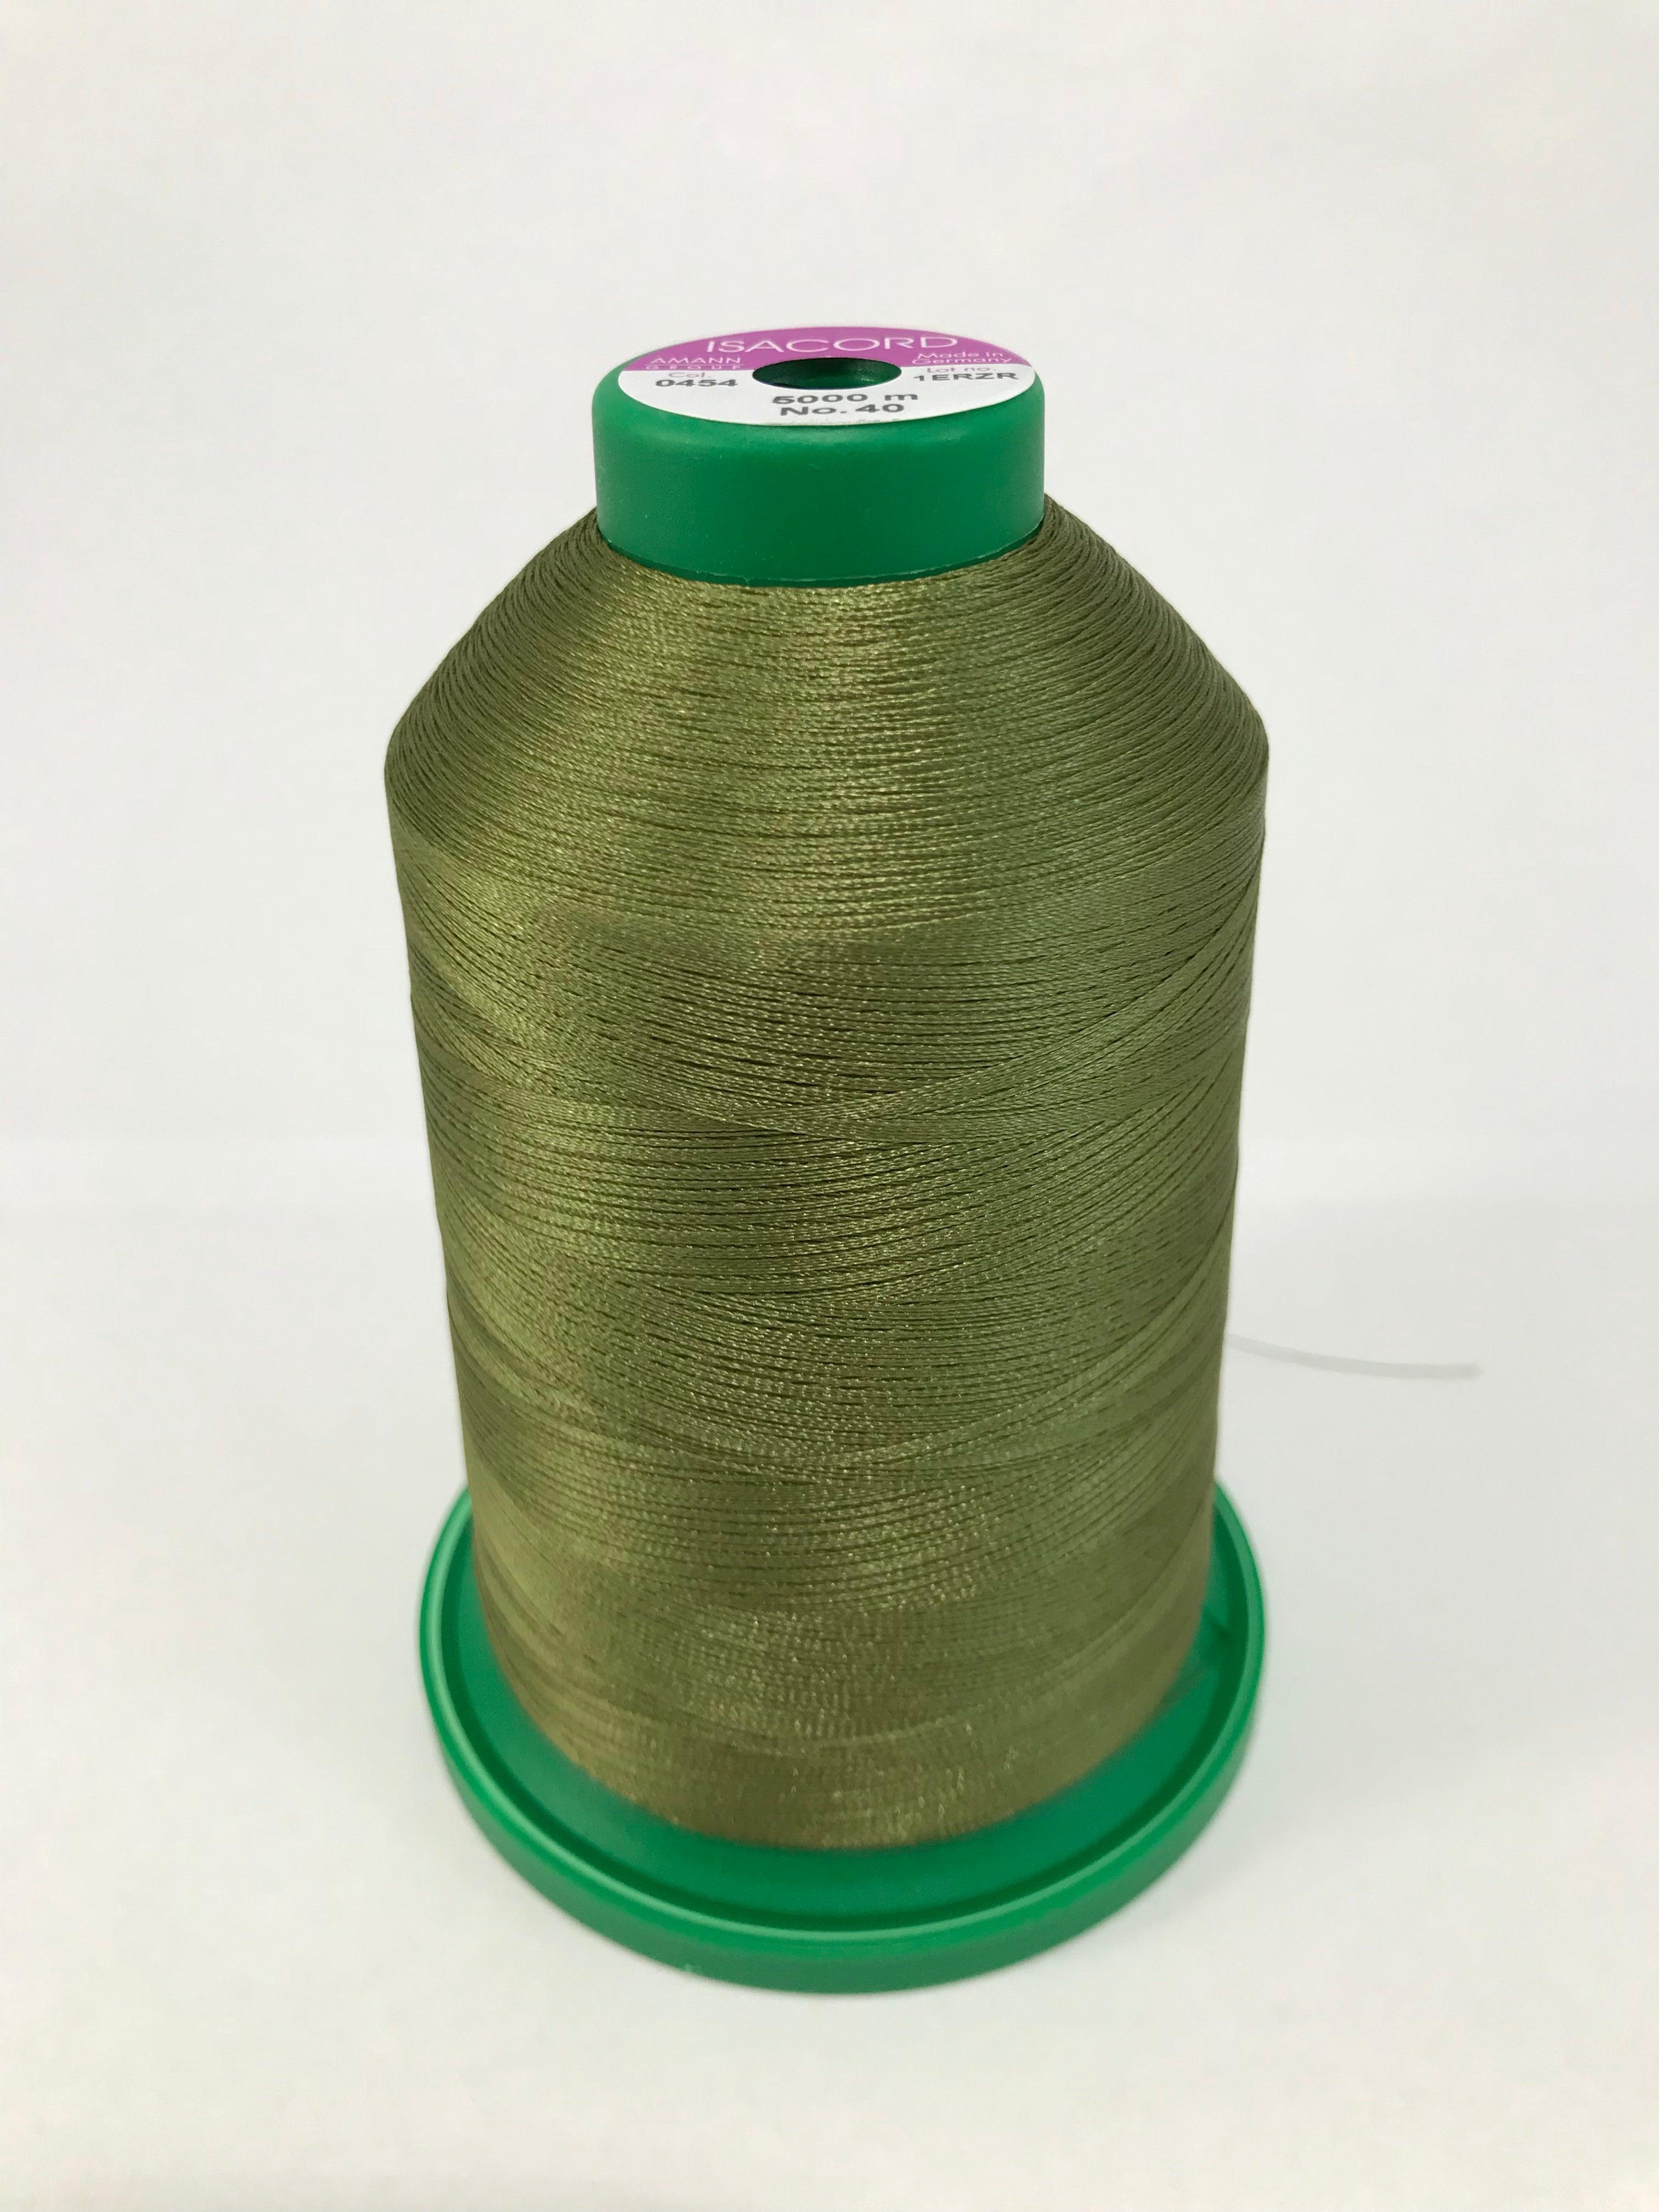 0454 - OLIVE DRAB - ISACORD EMBROIDERY THREAD 40 WT [2914-0454]